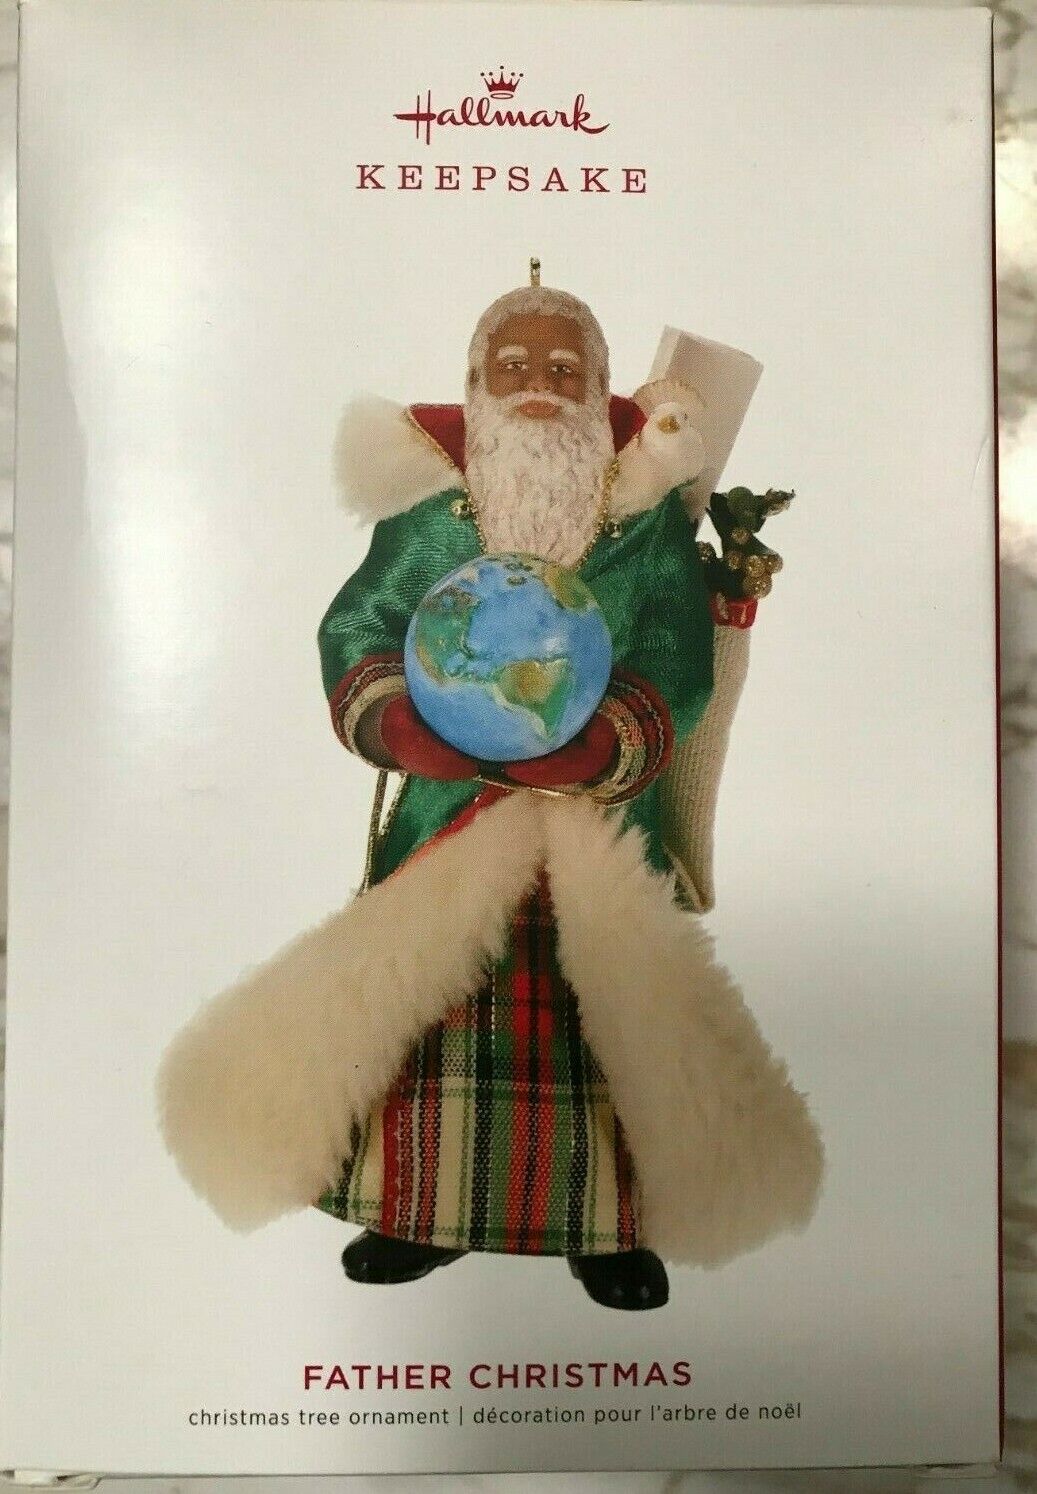  2019 HALLMARK KEEPSAKE ORNAMENT FATHER CHRISTMAS 16th IN THE SERIES NEW